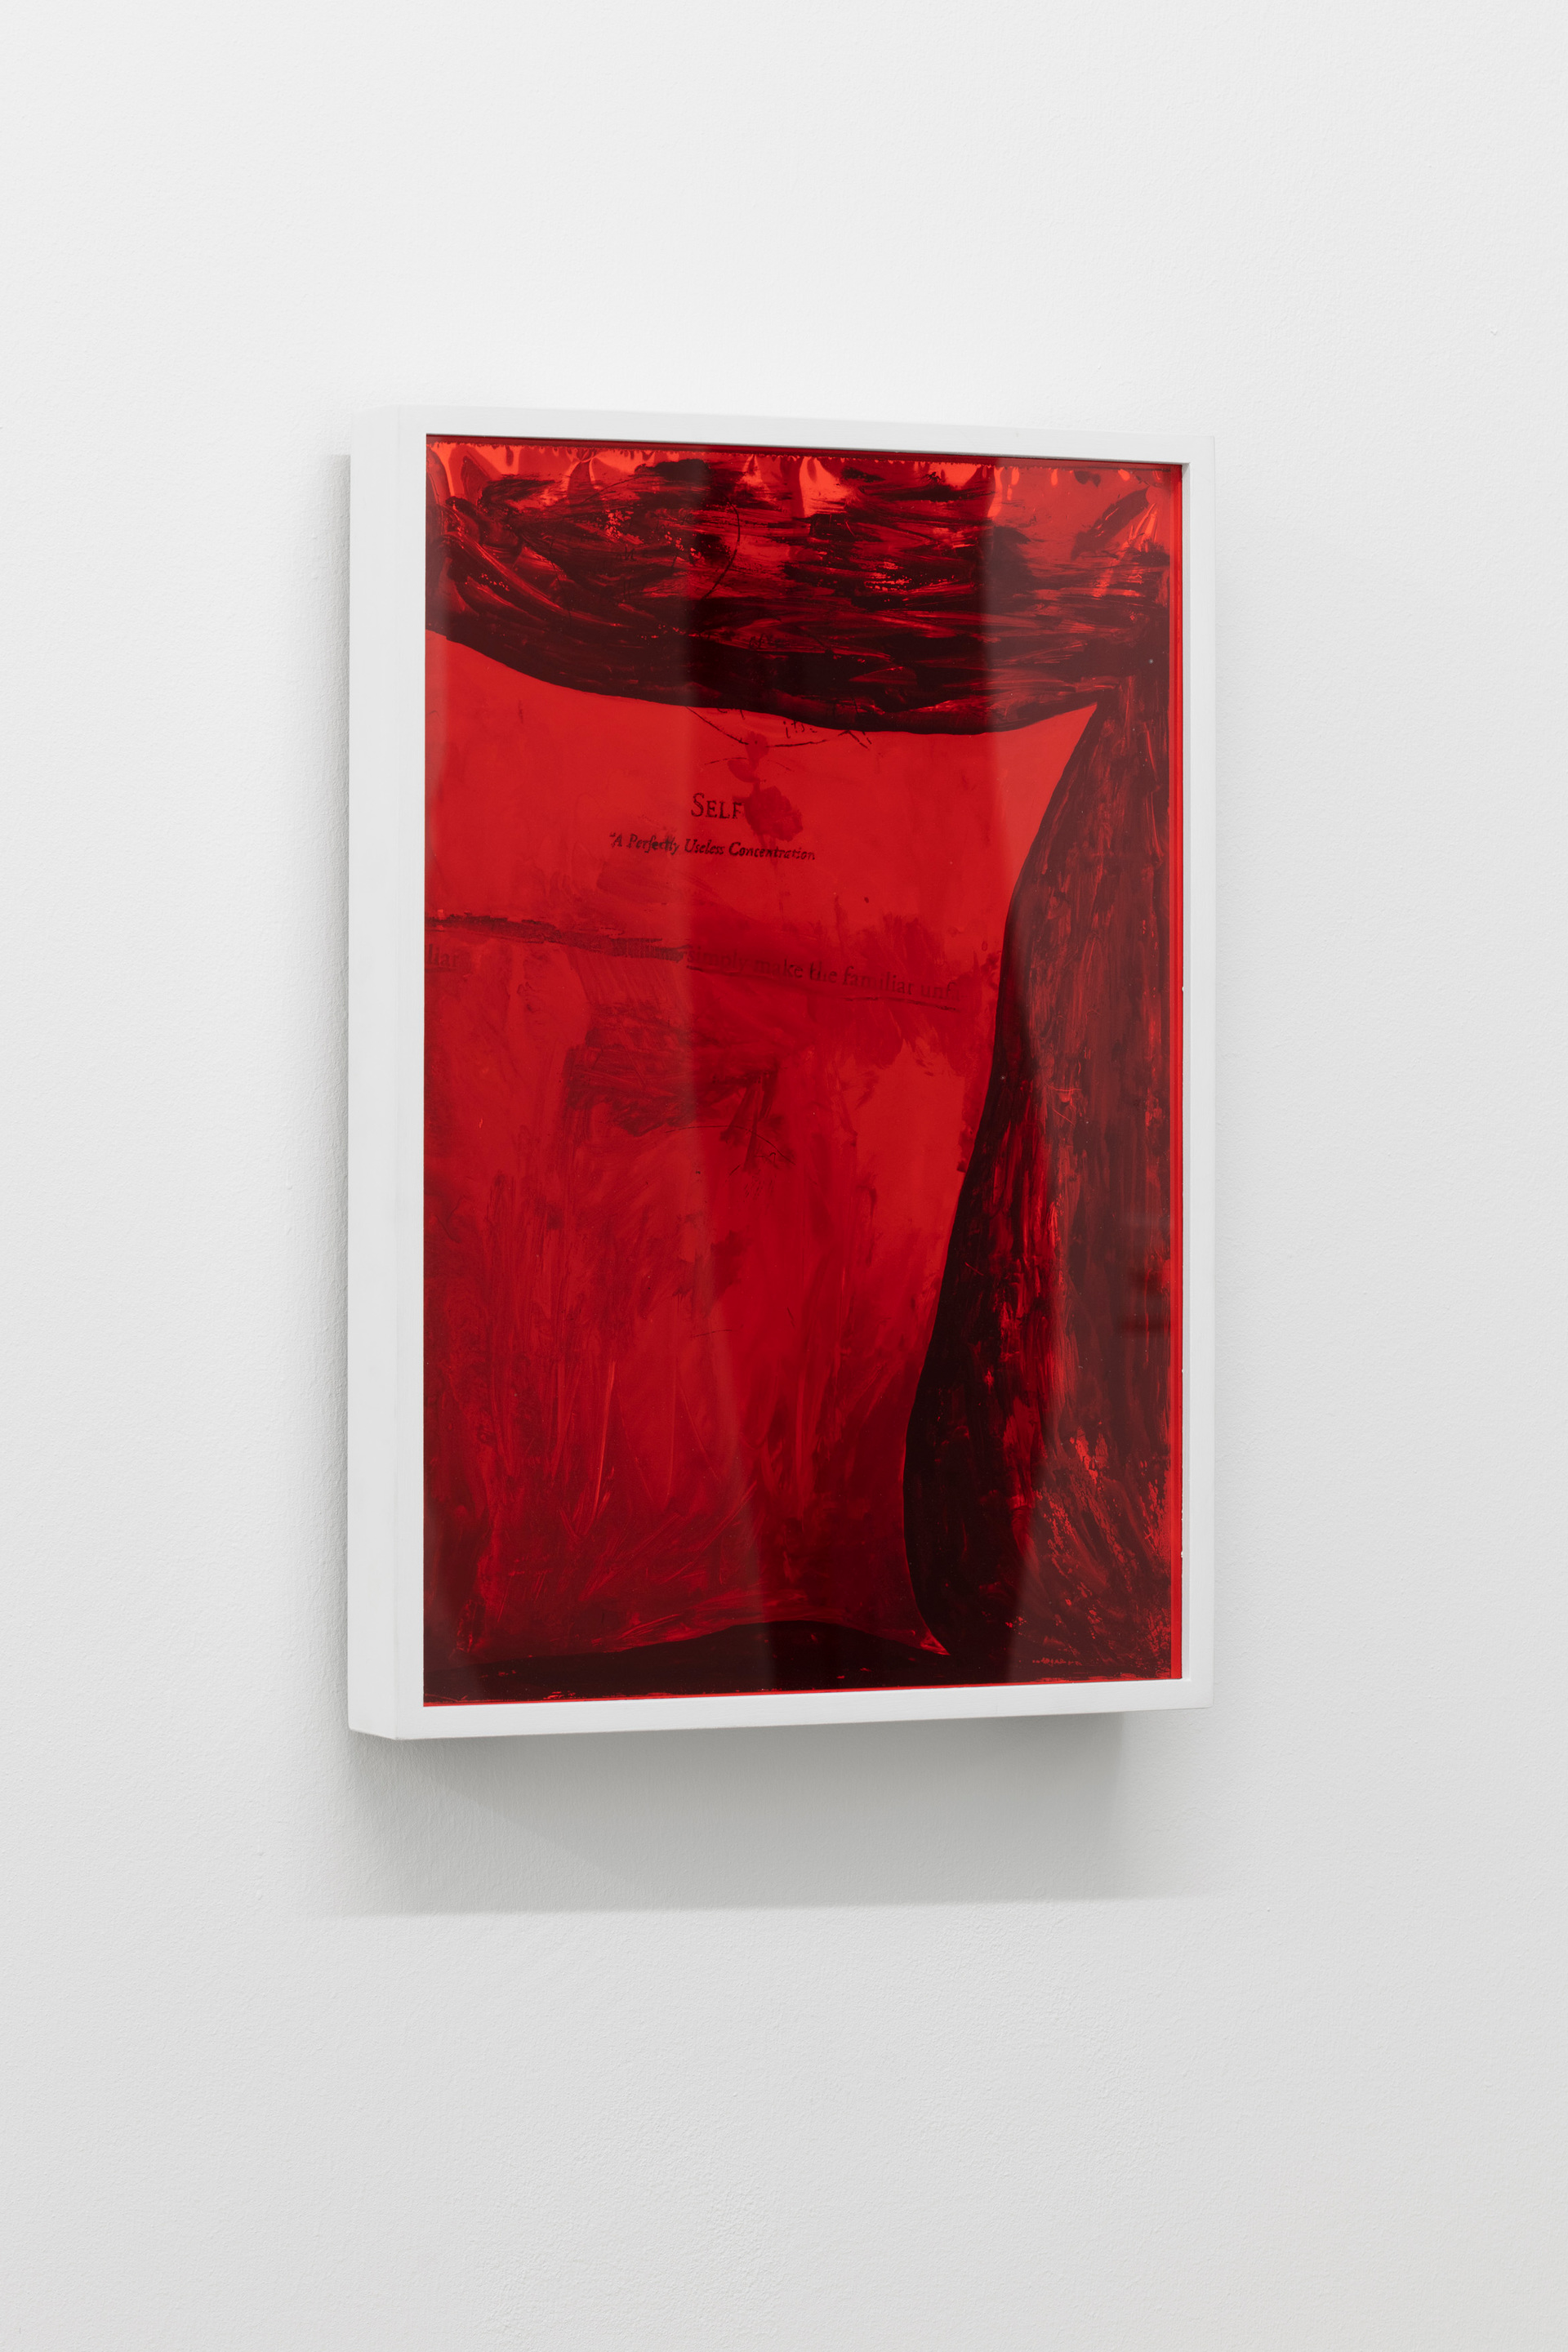 All images are installation views from Cassidy Toner's exhibition The Unstable 4th Wall  at the Gallery PHILLIPZOLLINGER (2019). WHAT DO YOU REPRESENT?', 2019, solvent transfer and watercolor on one-way reflective window film, 44 x 31 x 6 cm